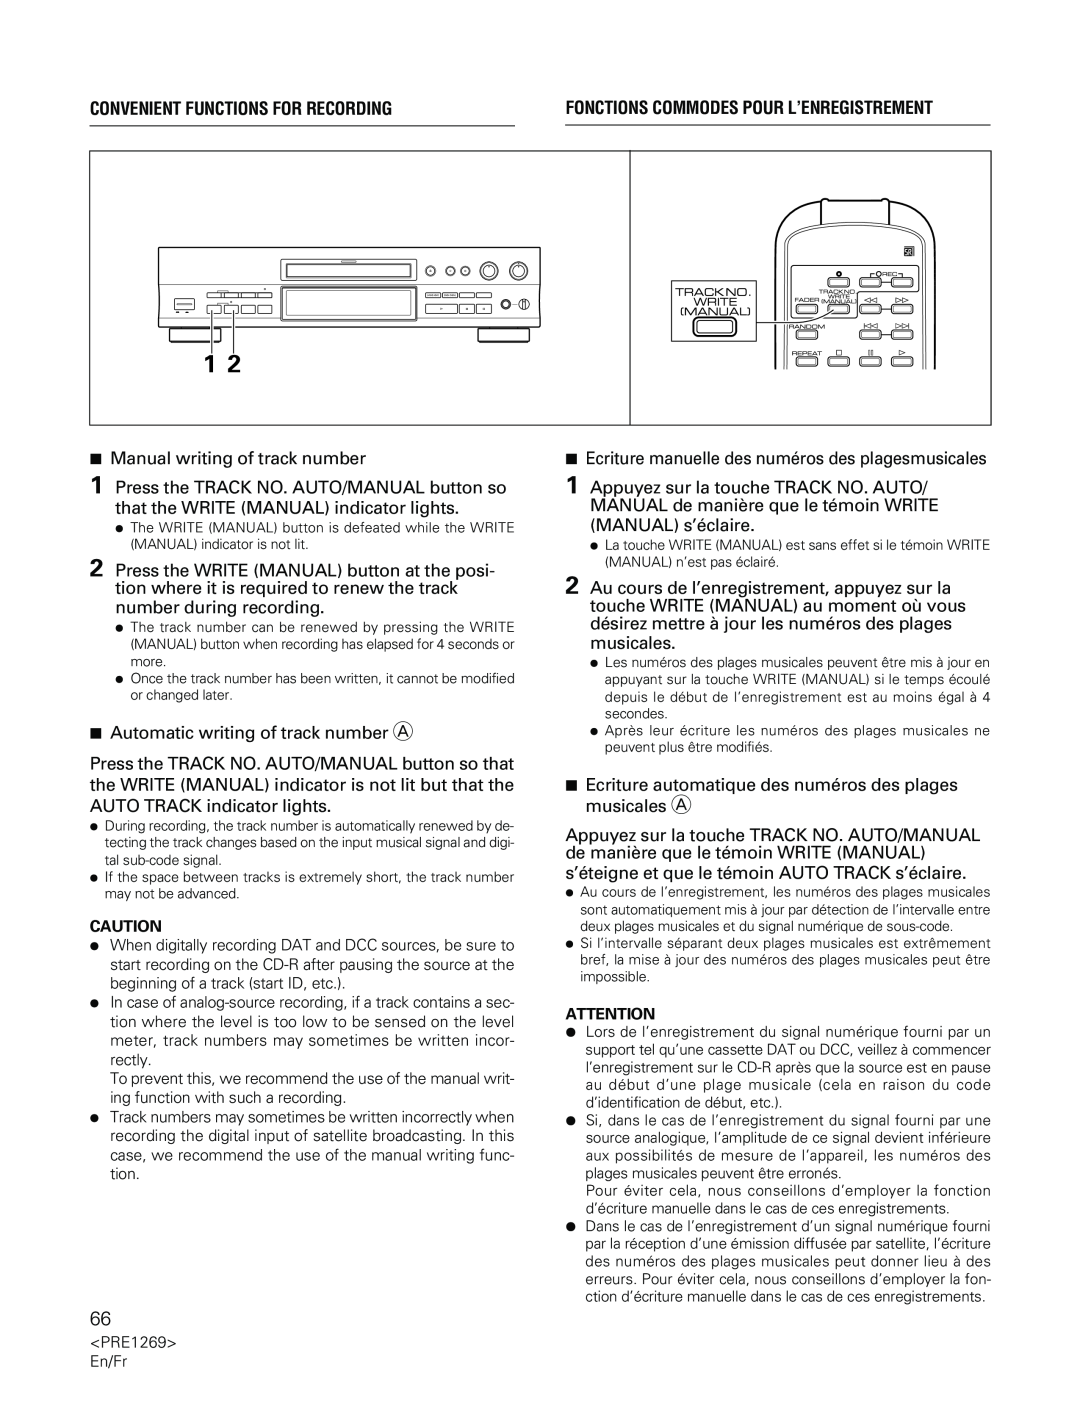 Pioneer PDR-555RW operating instructions 7Manual writing of track number 